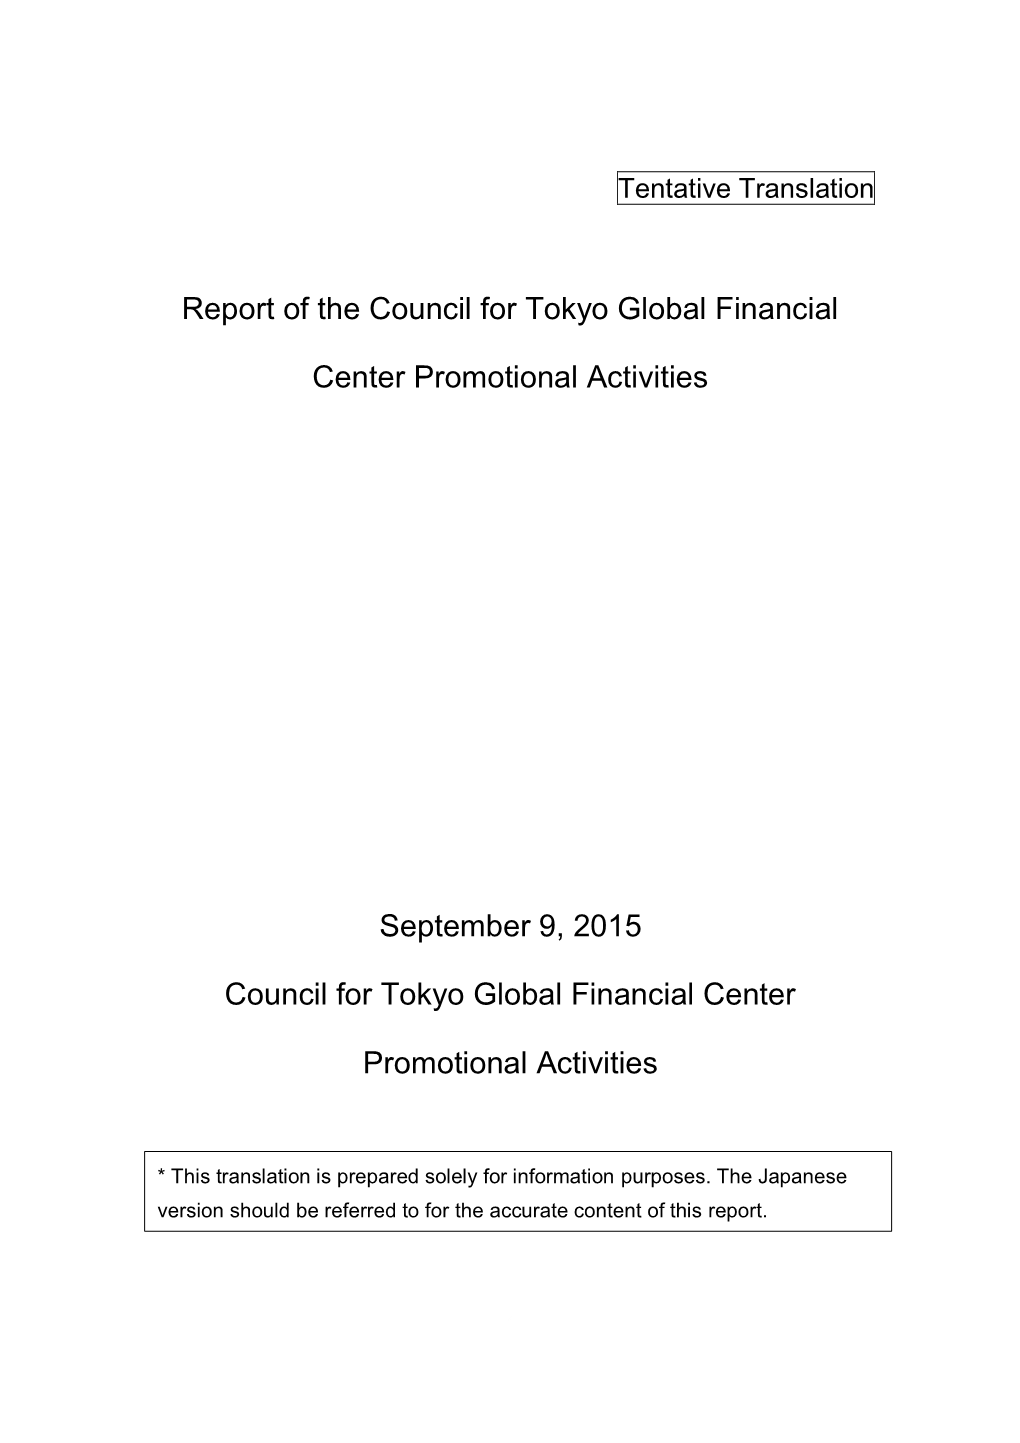 Report of the Council for Tokyo Global Financial Center Promotional